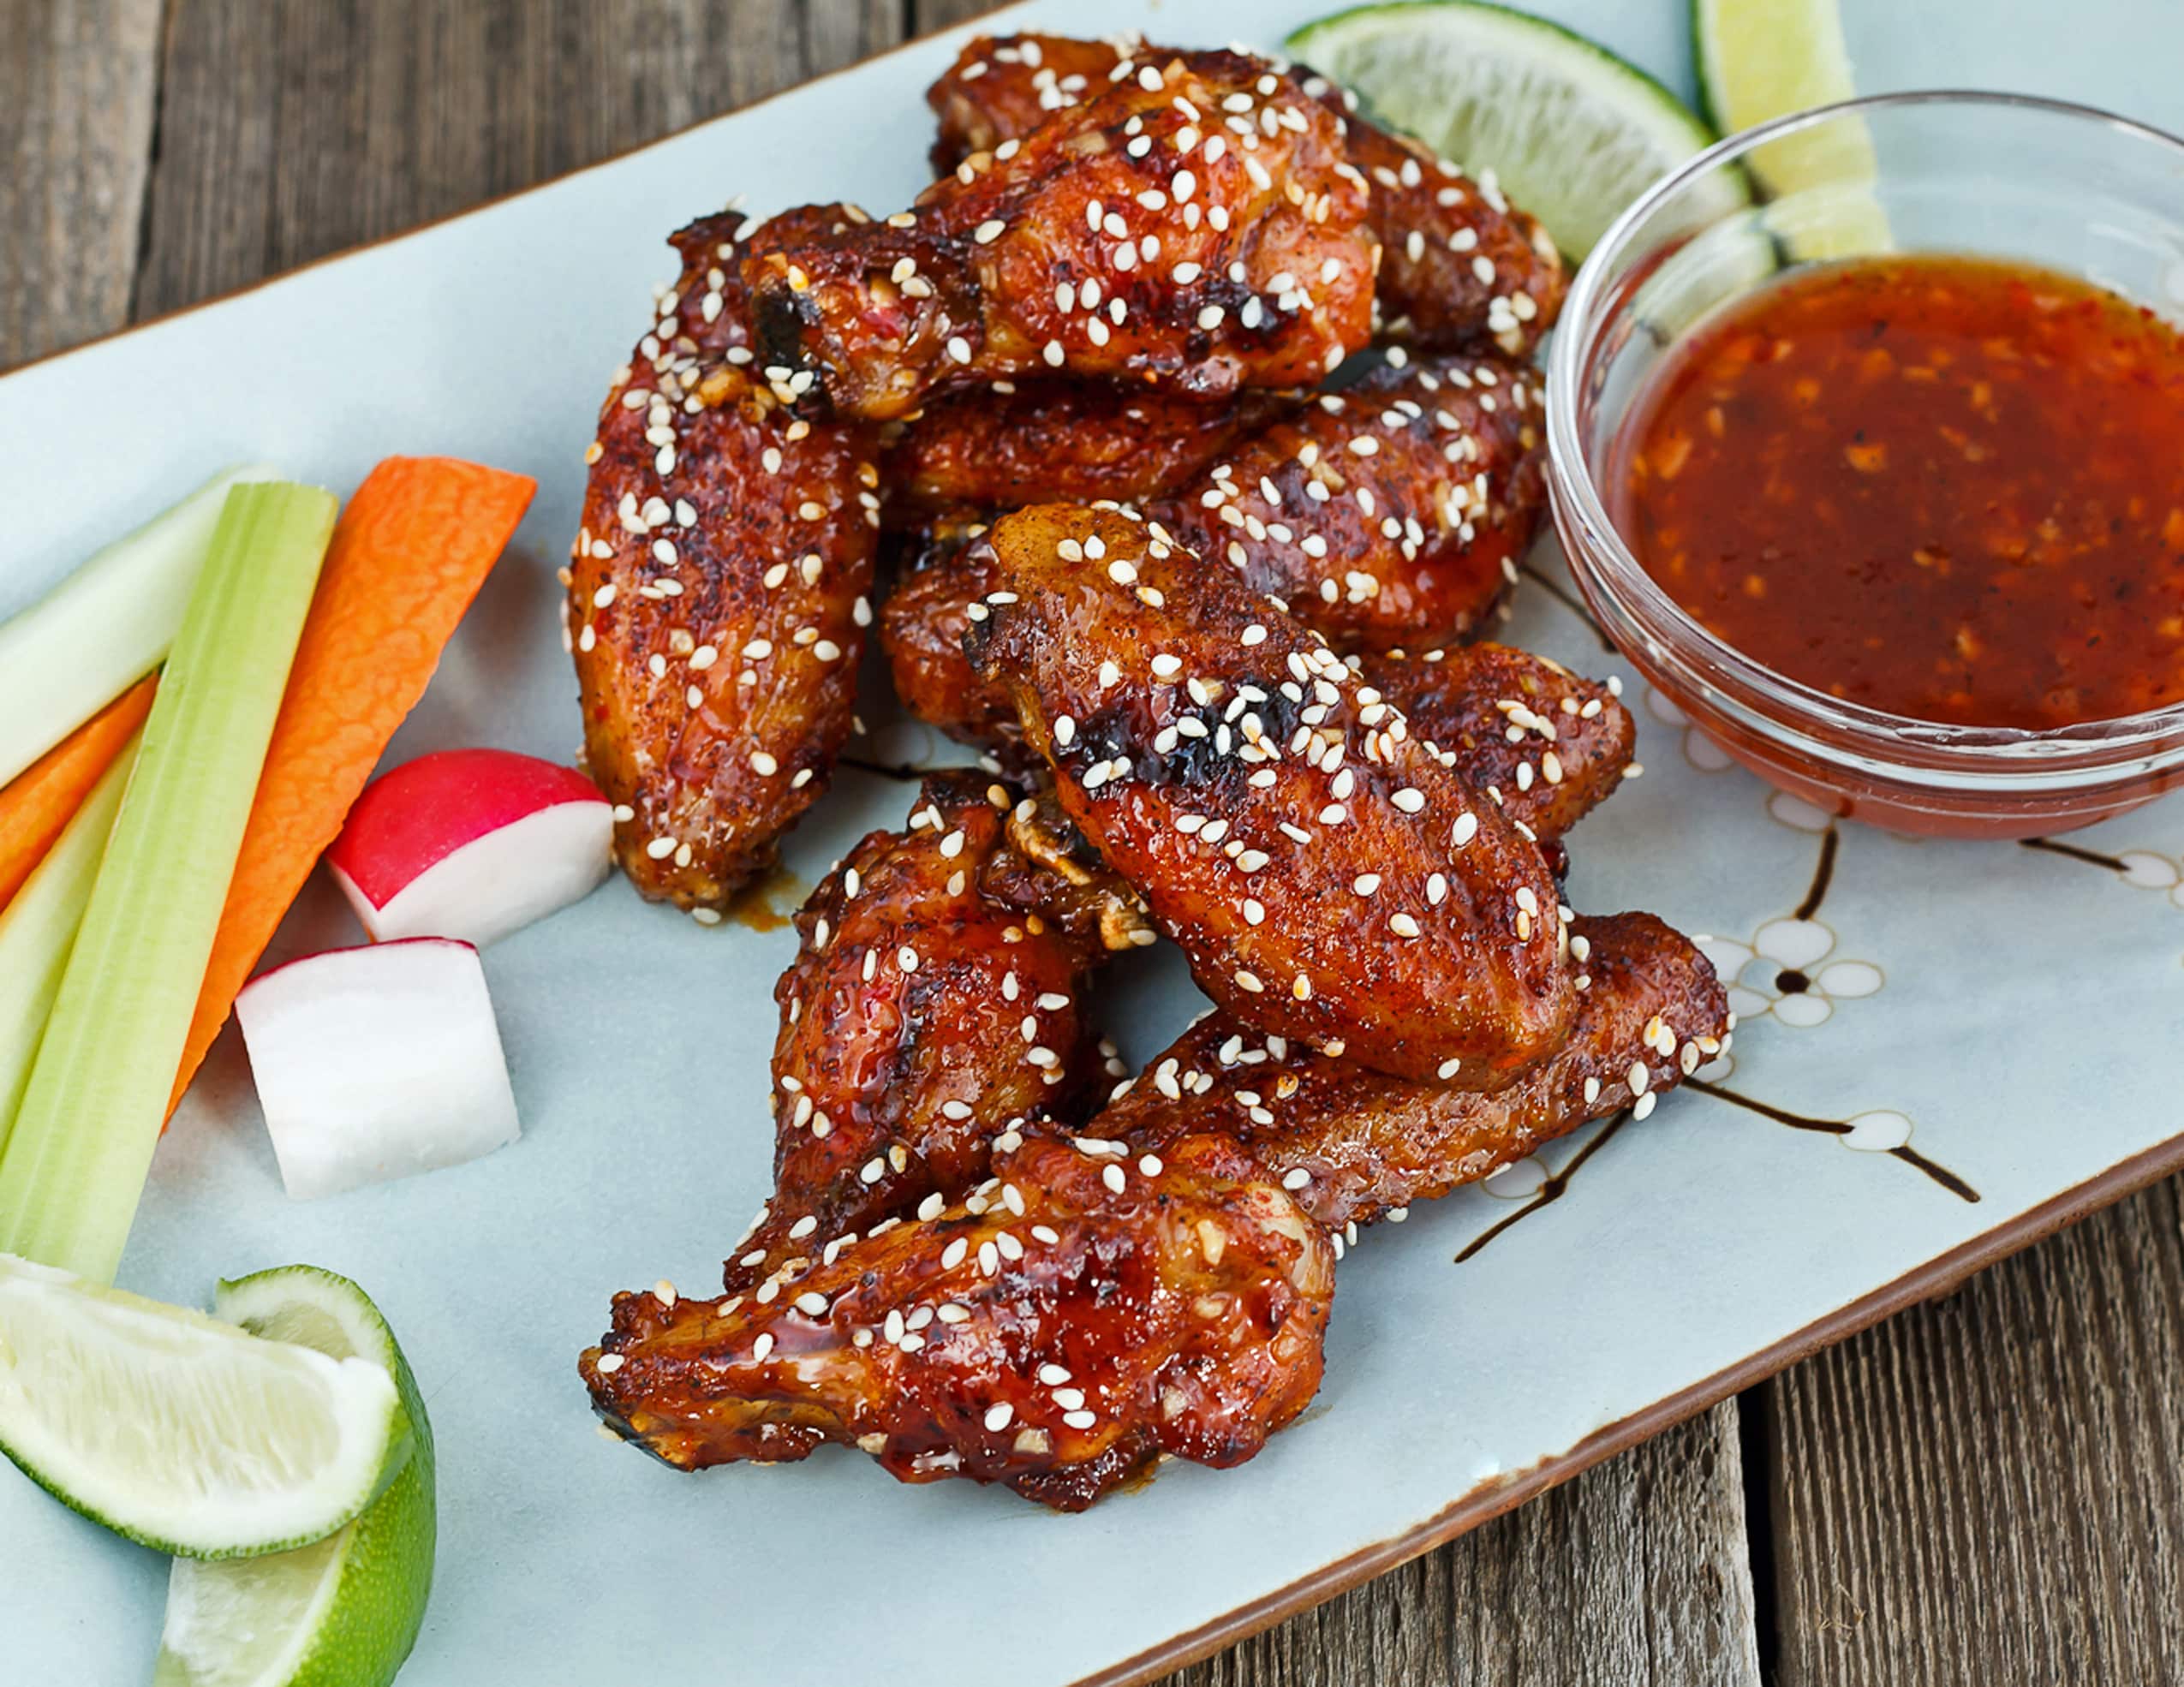 Baked Thai Chili Sesame Chicken Wings: Make Healtheir Wings at Home!